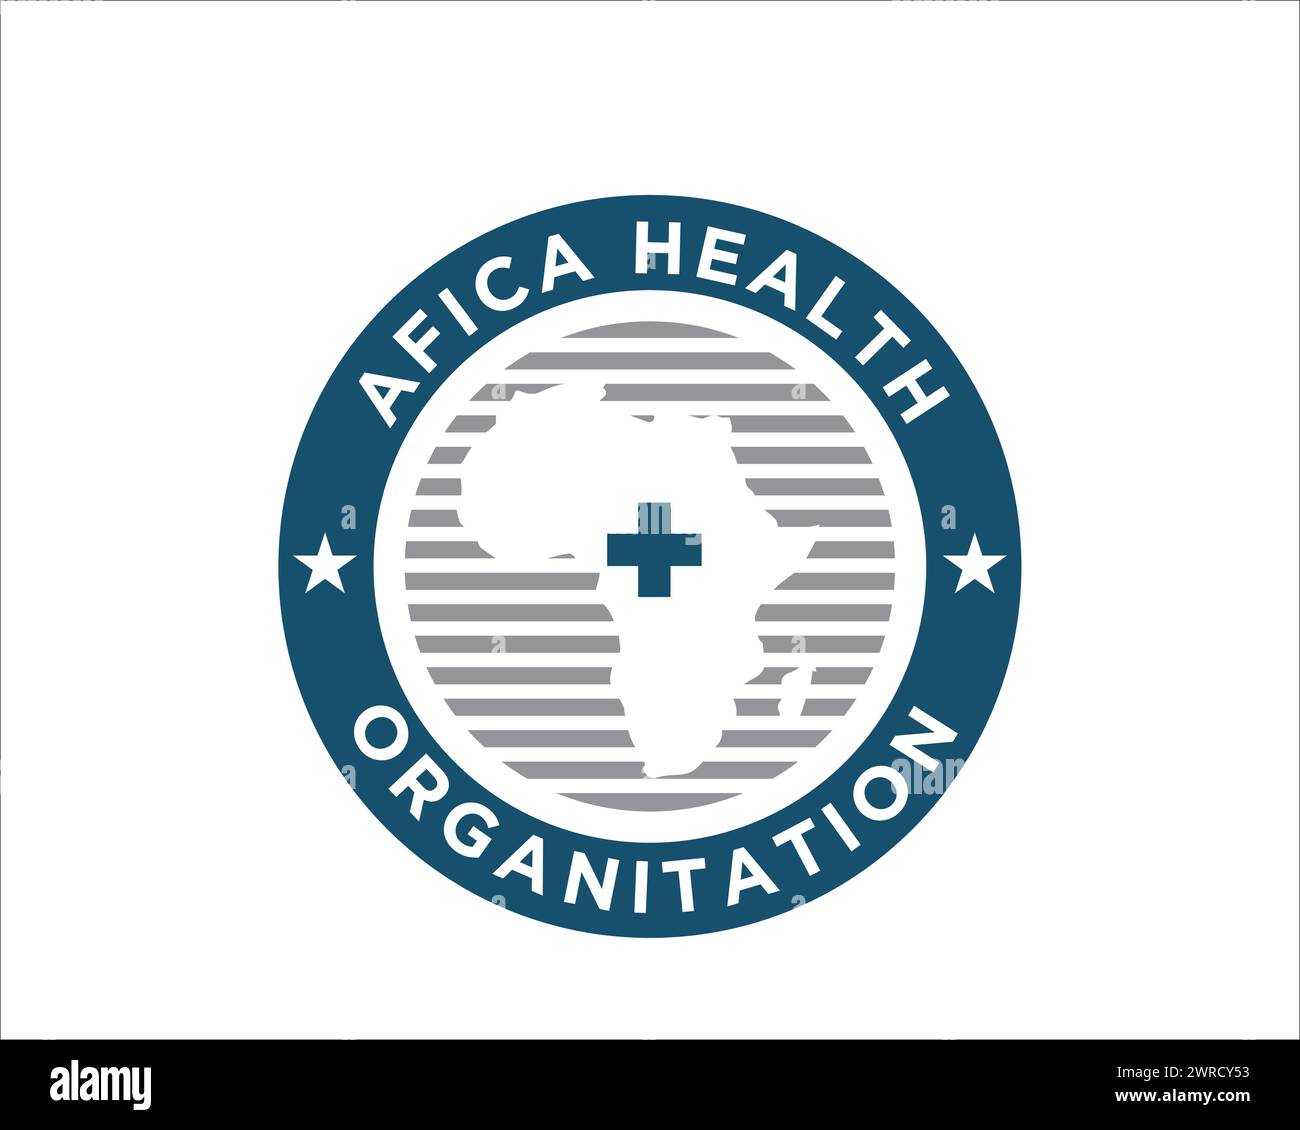 africa health logo designs with africa map and plus logo Stock Vector